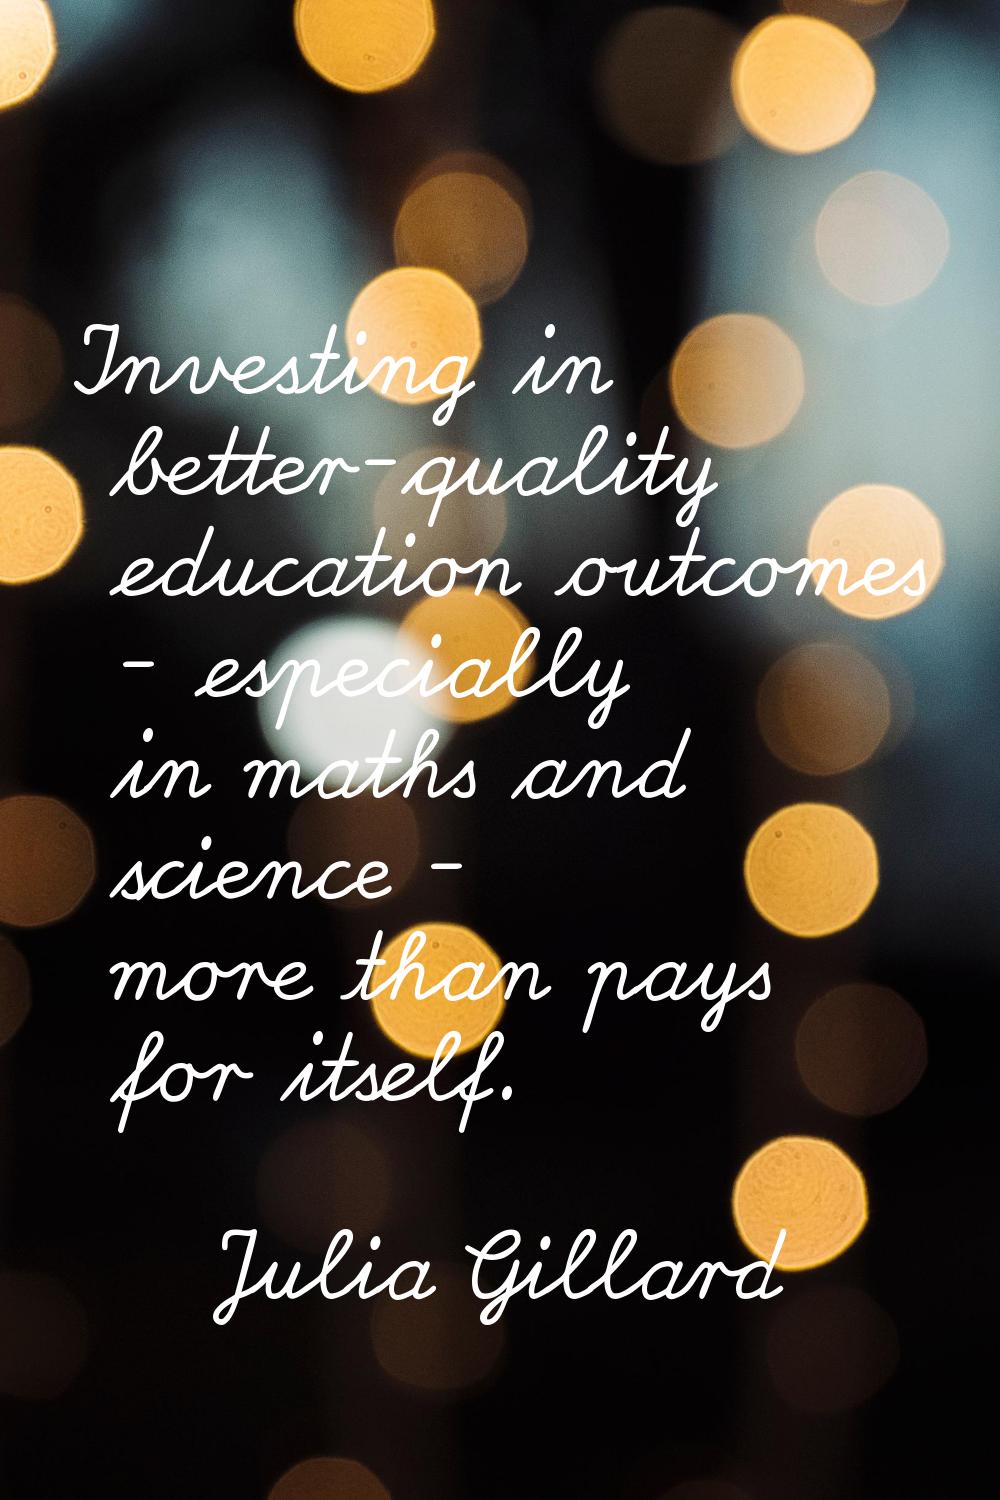 Investing in better-quality education outcomes - especially in maths and science - more than pays f